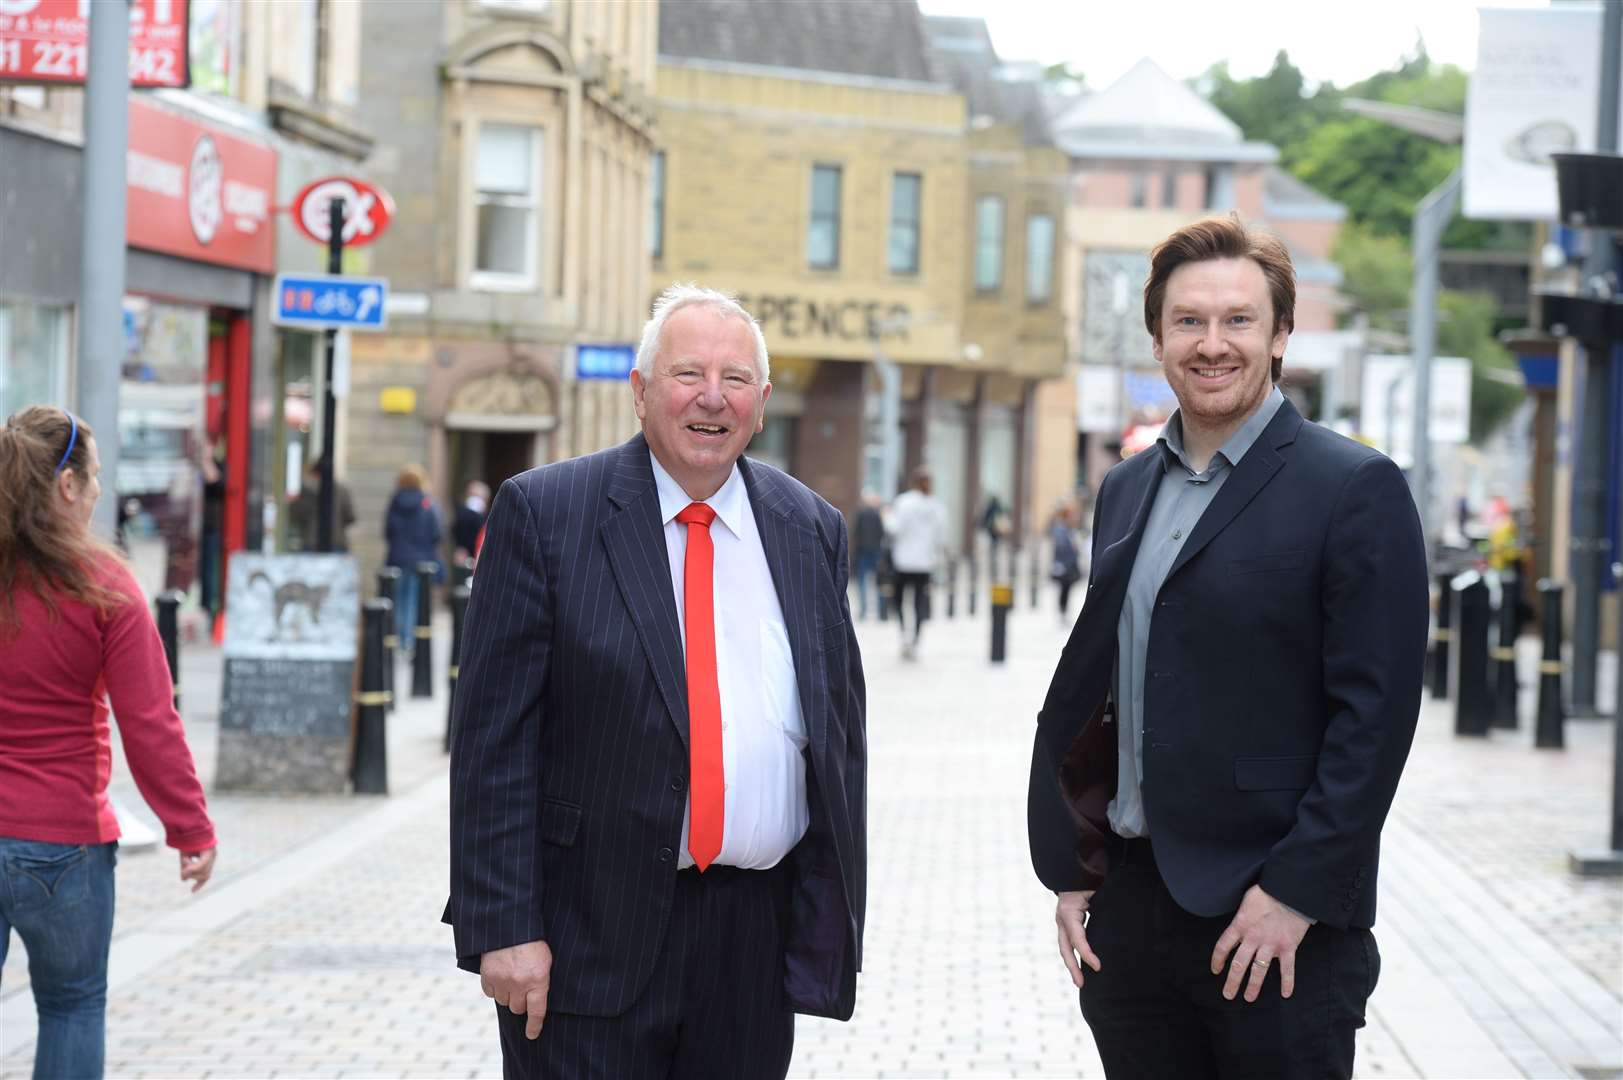 Inverness BID manager Mike Smith and Visit Inverness Loch Ness chief executive Michael Golding.